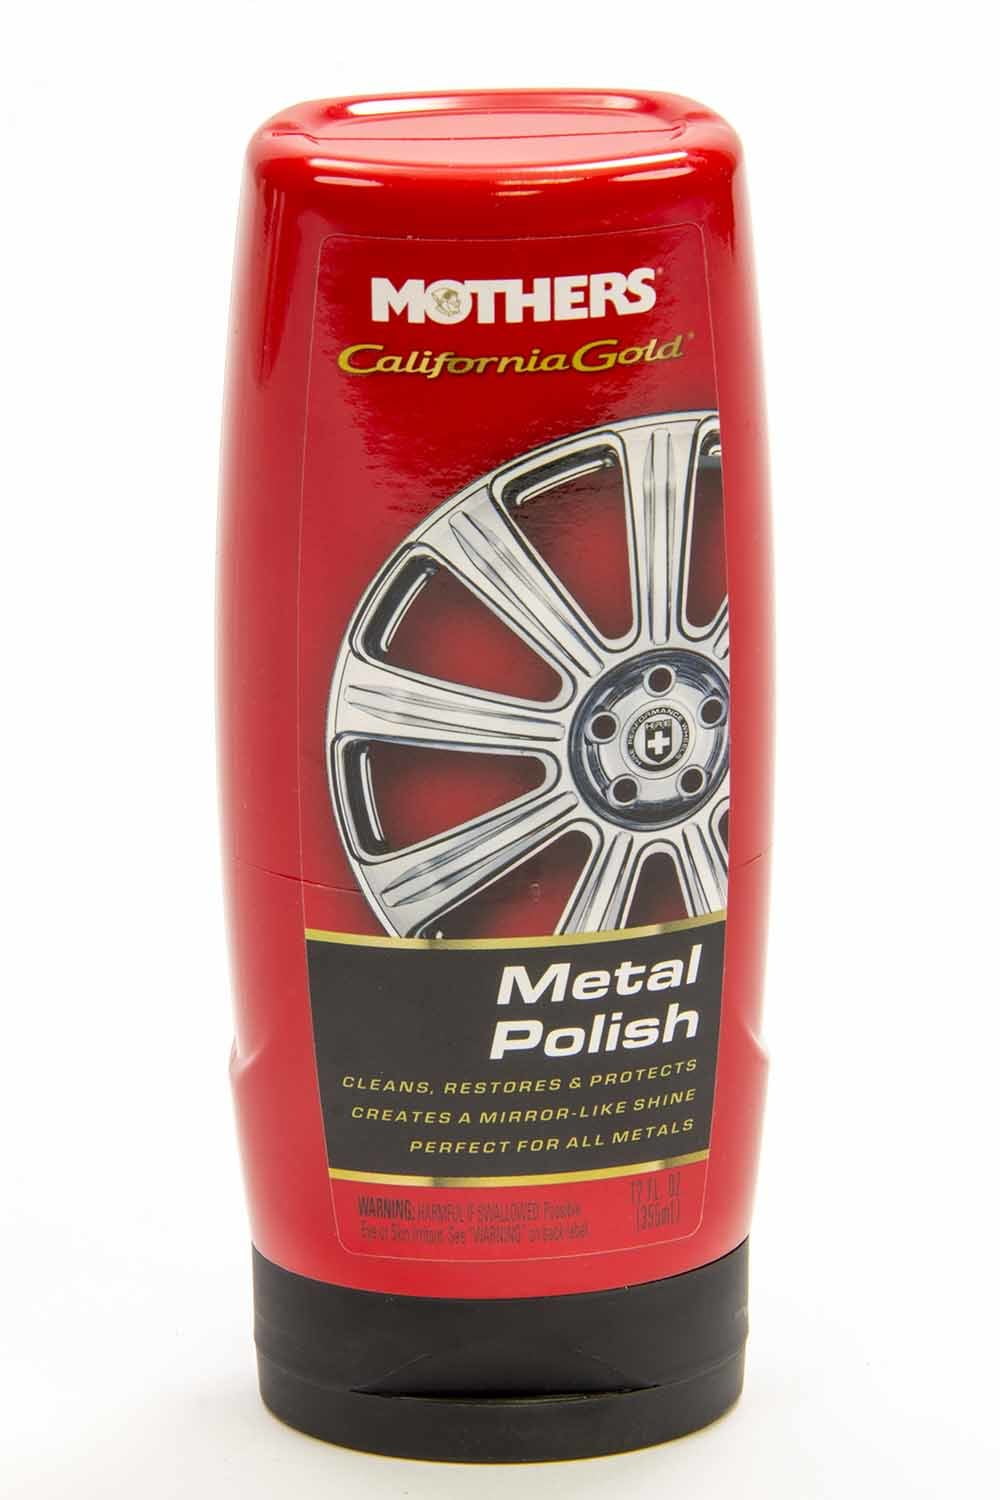 Mothers metal polish review